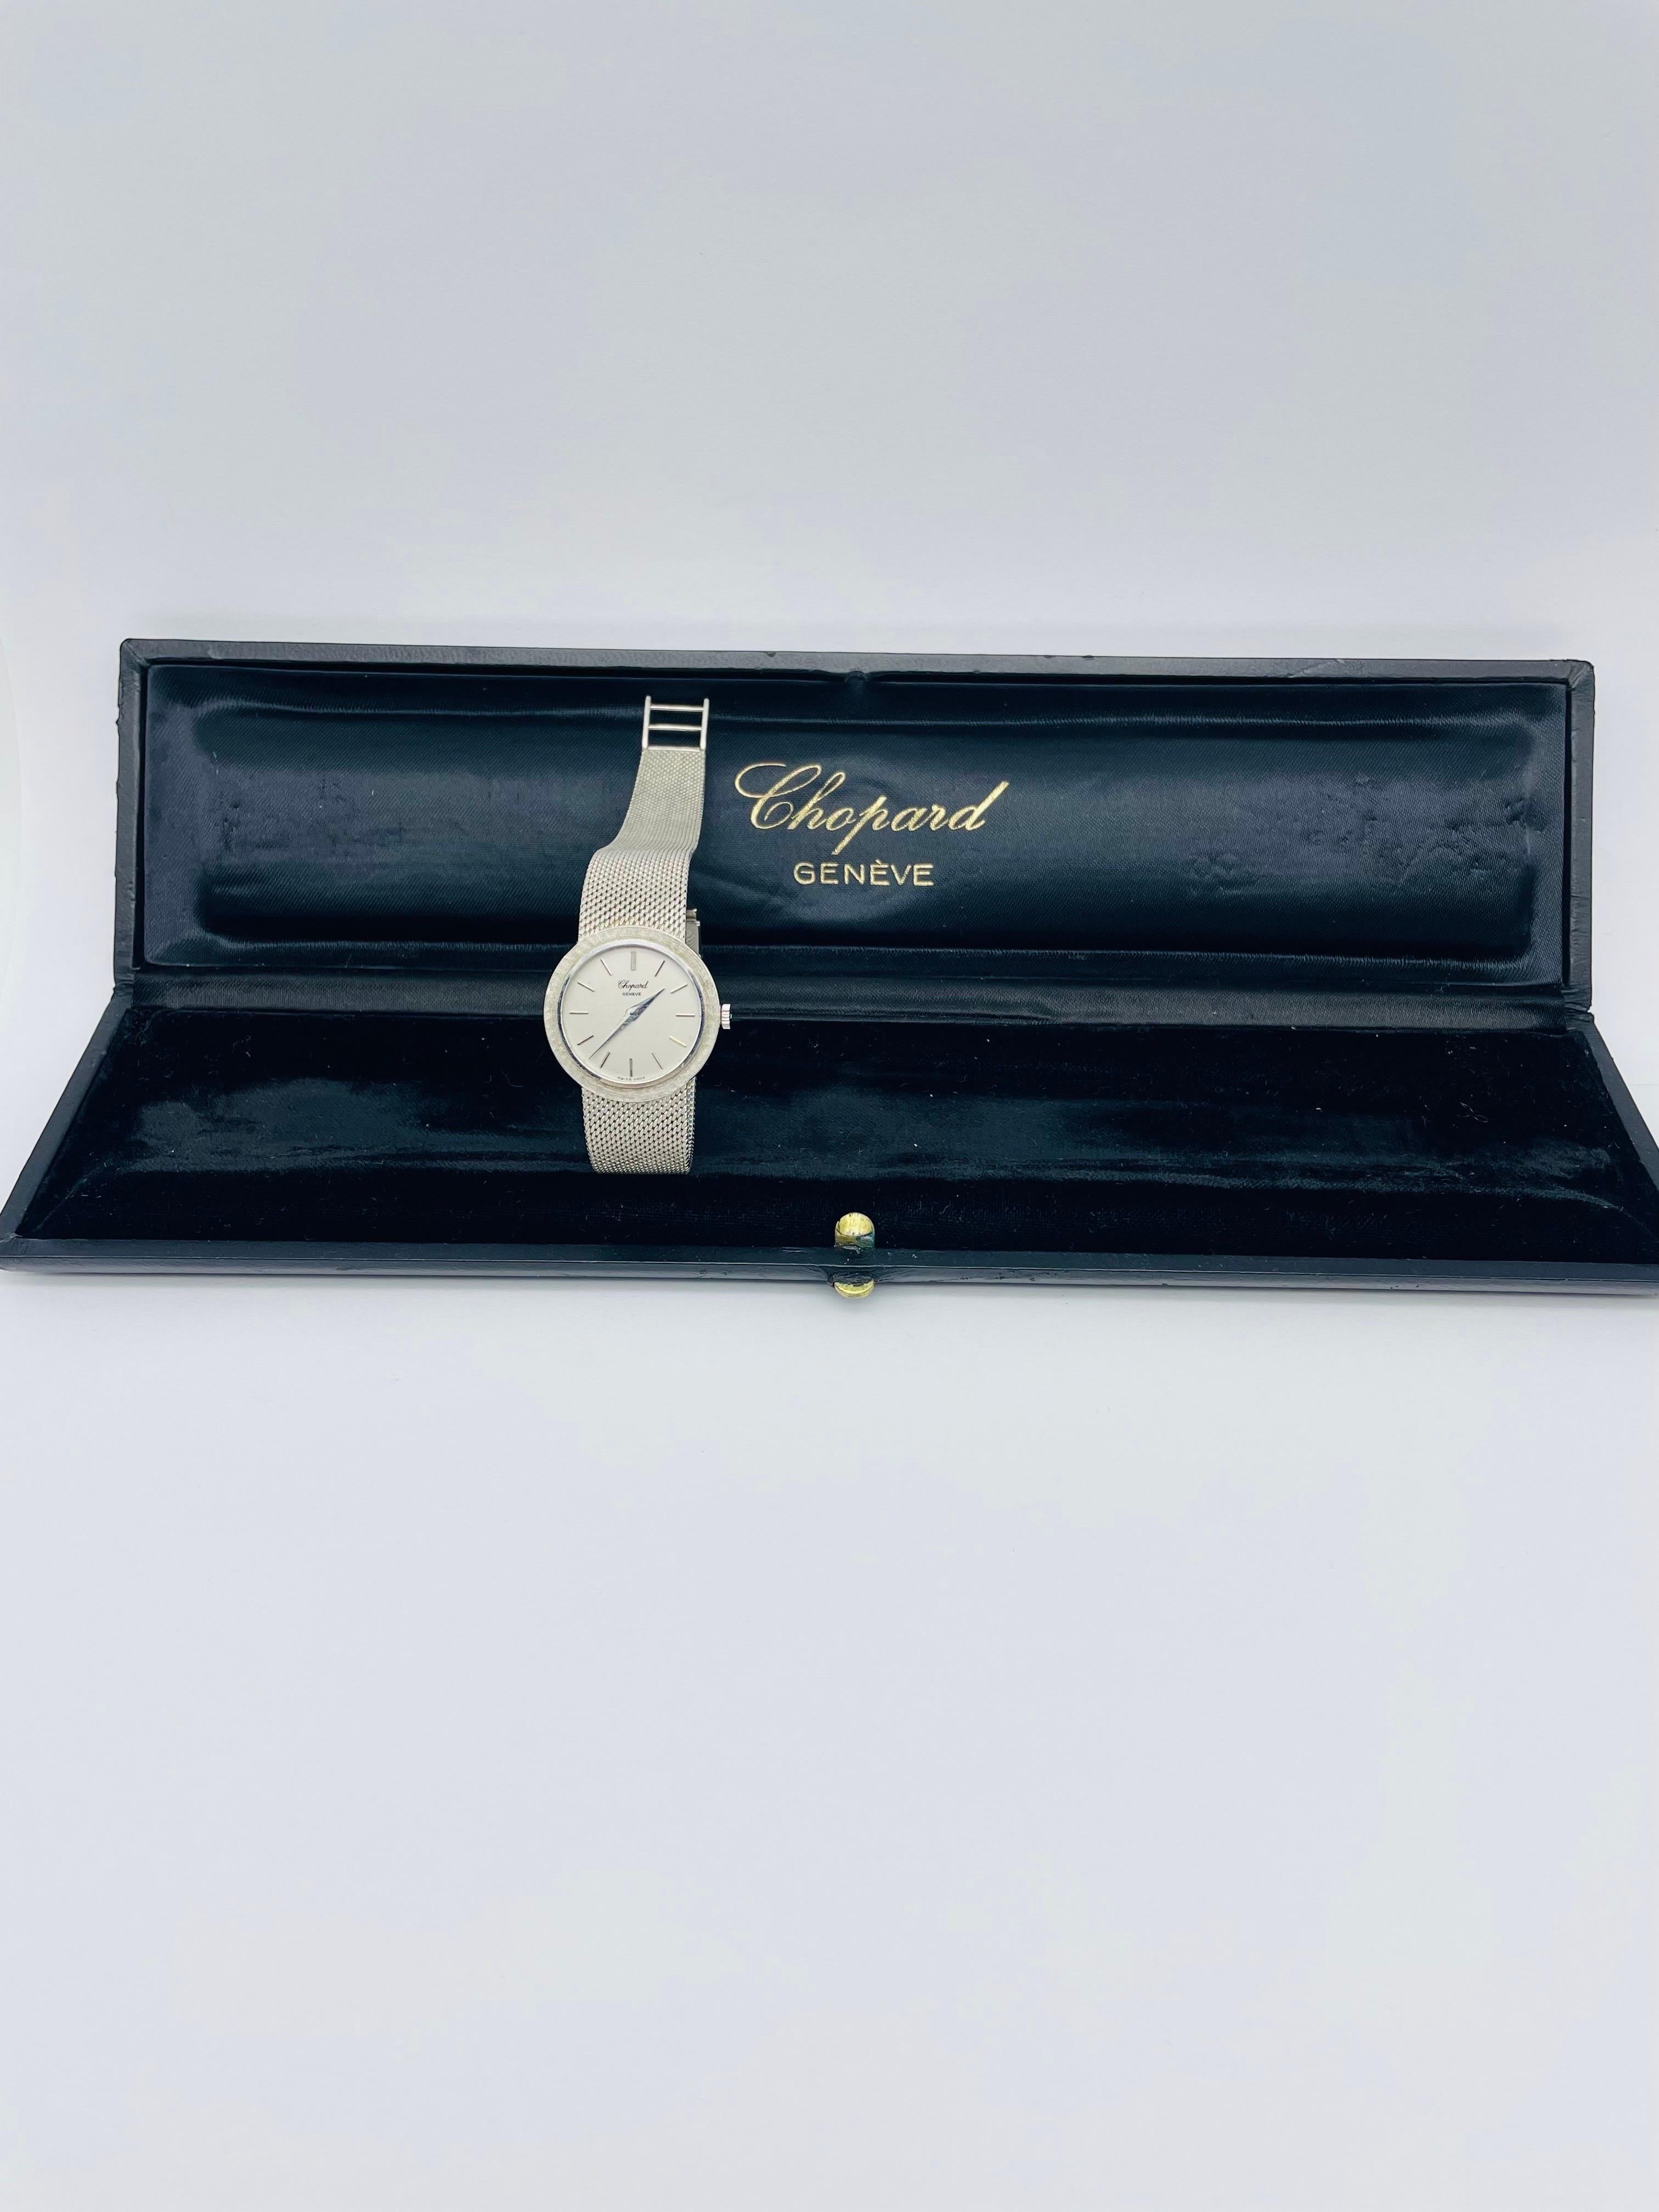 Vintage Chopard Ladies Watch 750 White Gold 18k Jewelry Ref. D6009 For Sale 4